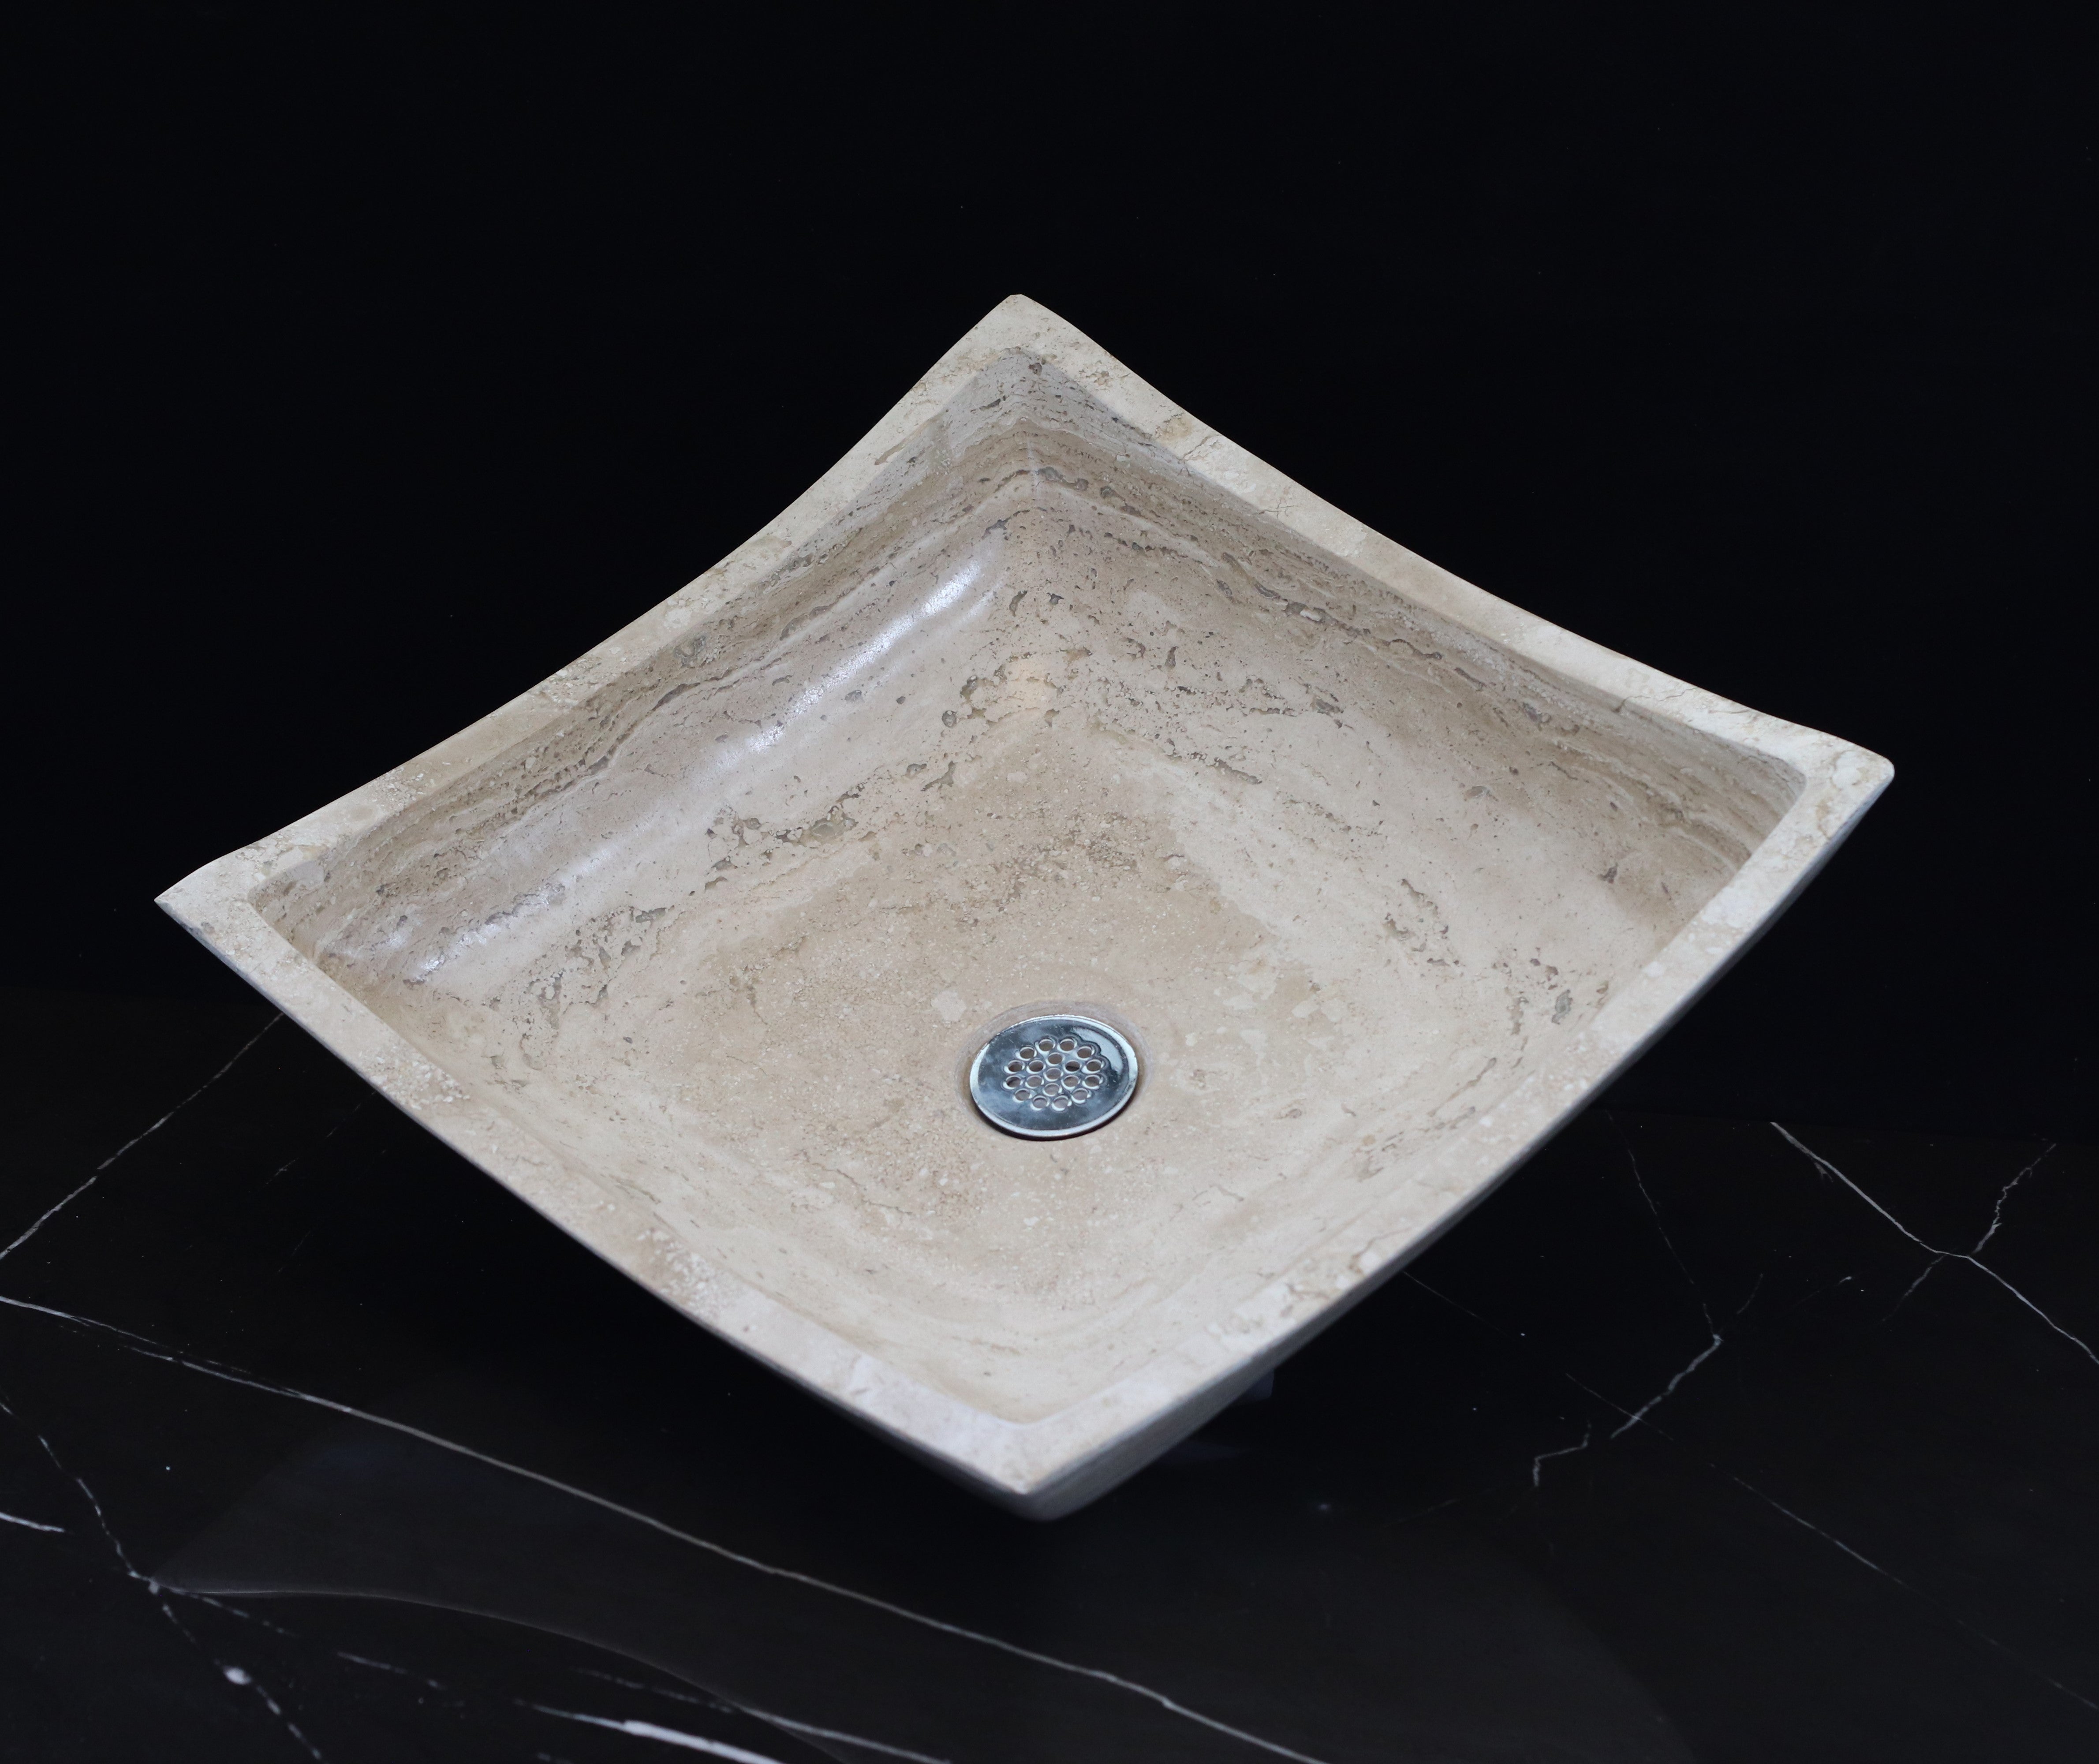 Beige Travertine Limestone Vessel Sink. A beautiful work of art. We offer fast shipping. Handmade in Mexico. We hand finish, package, and ship from the USA. Buy now at www.felipeandgrace.com. 